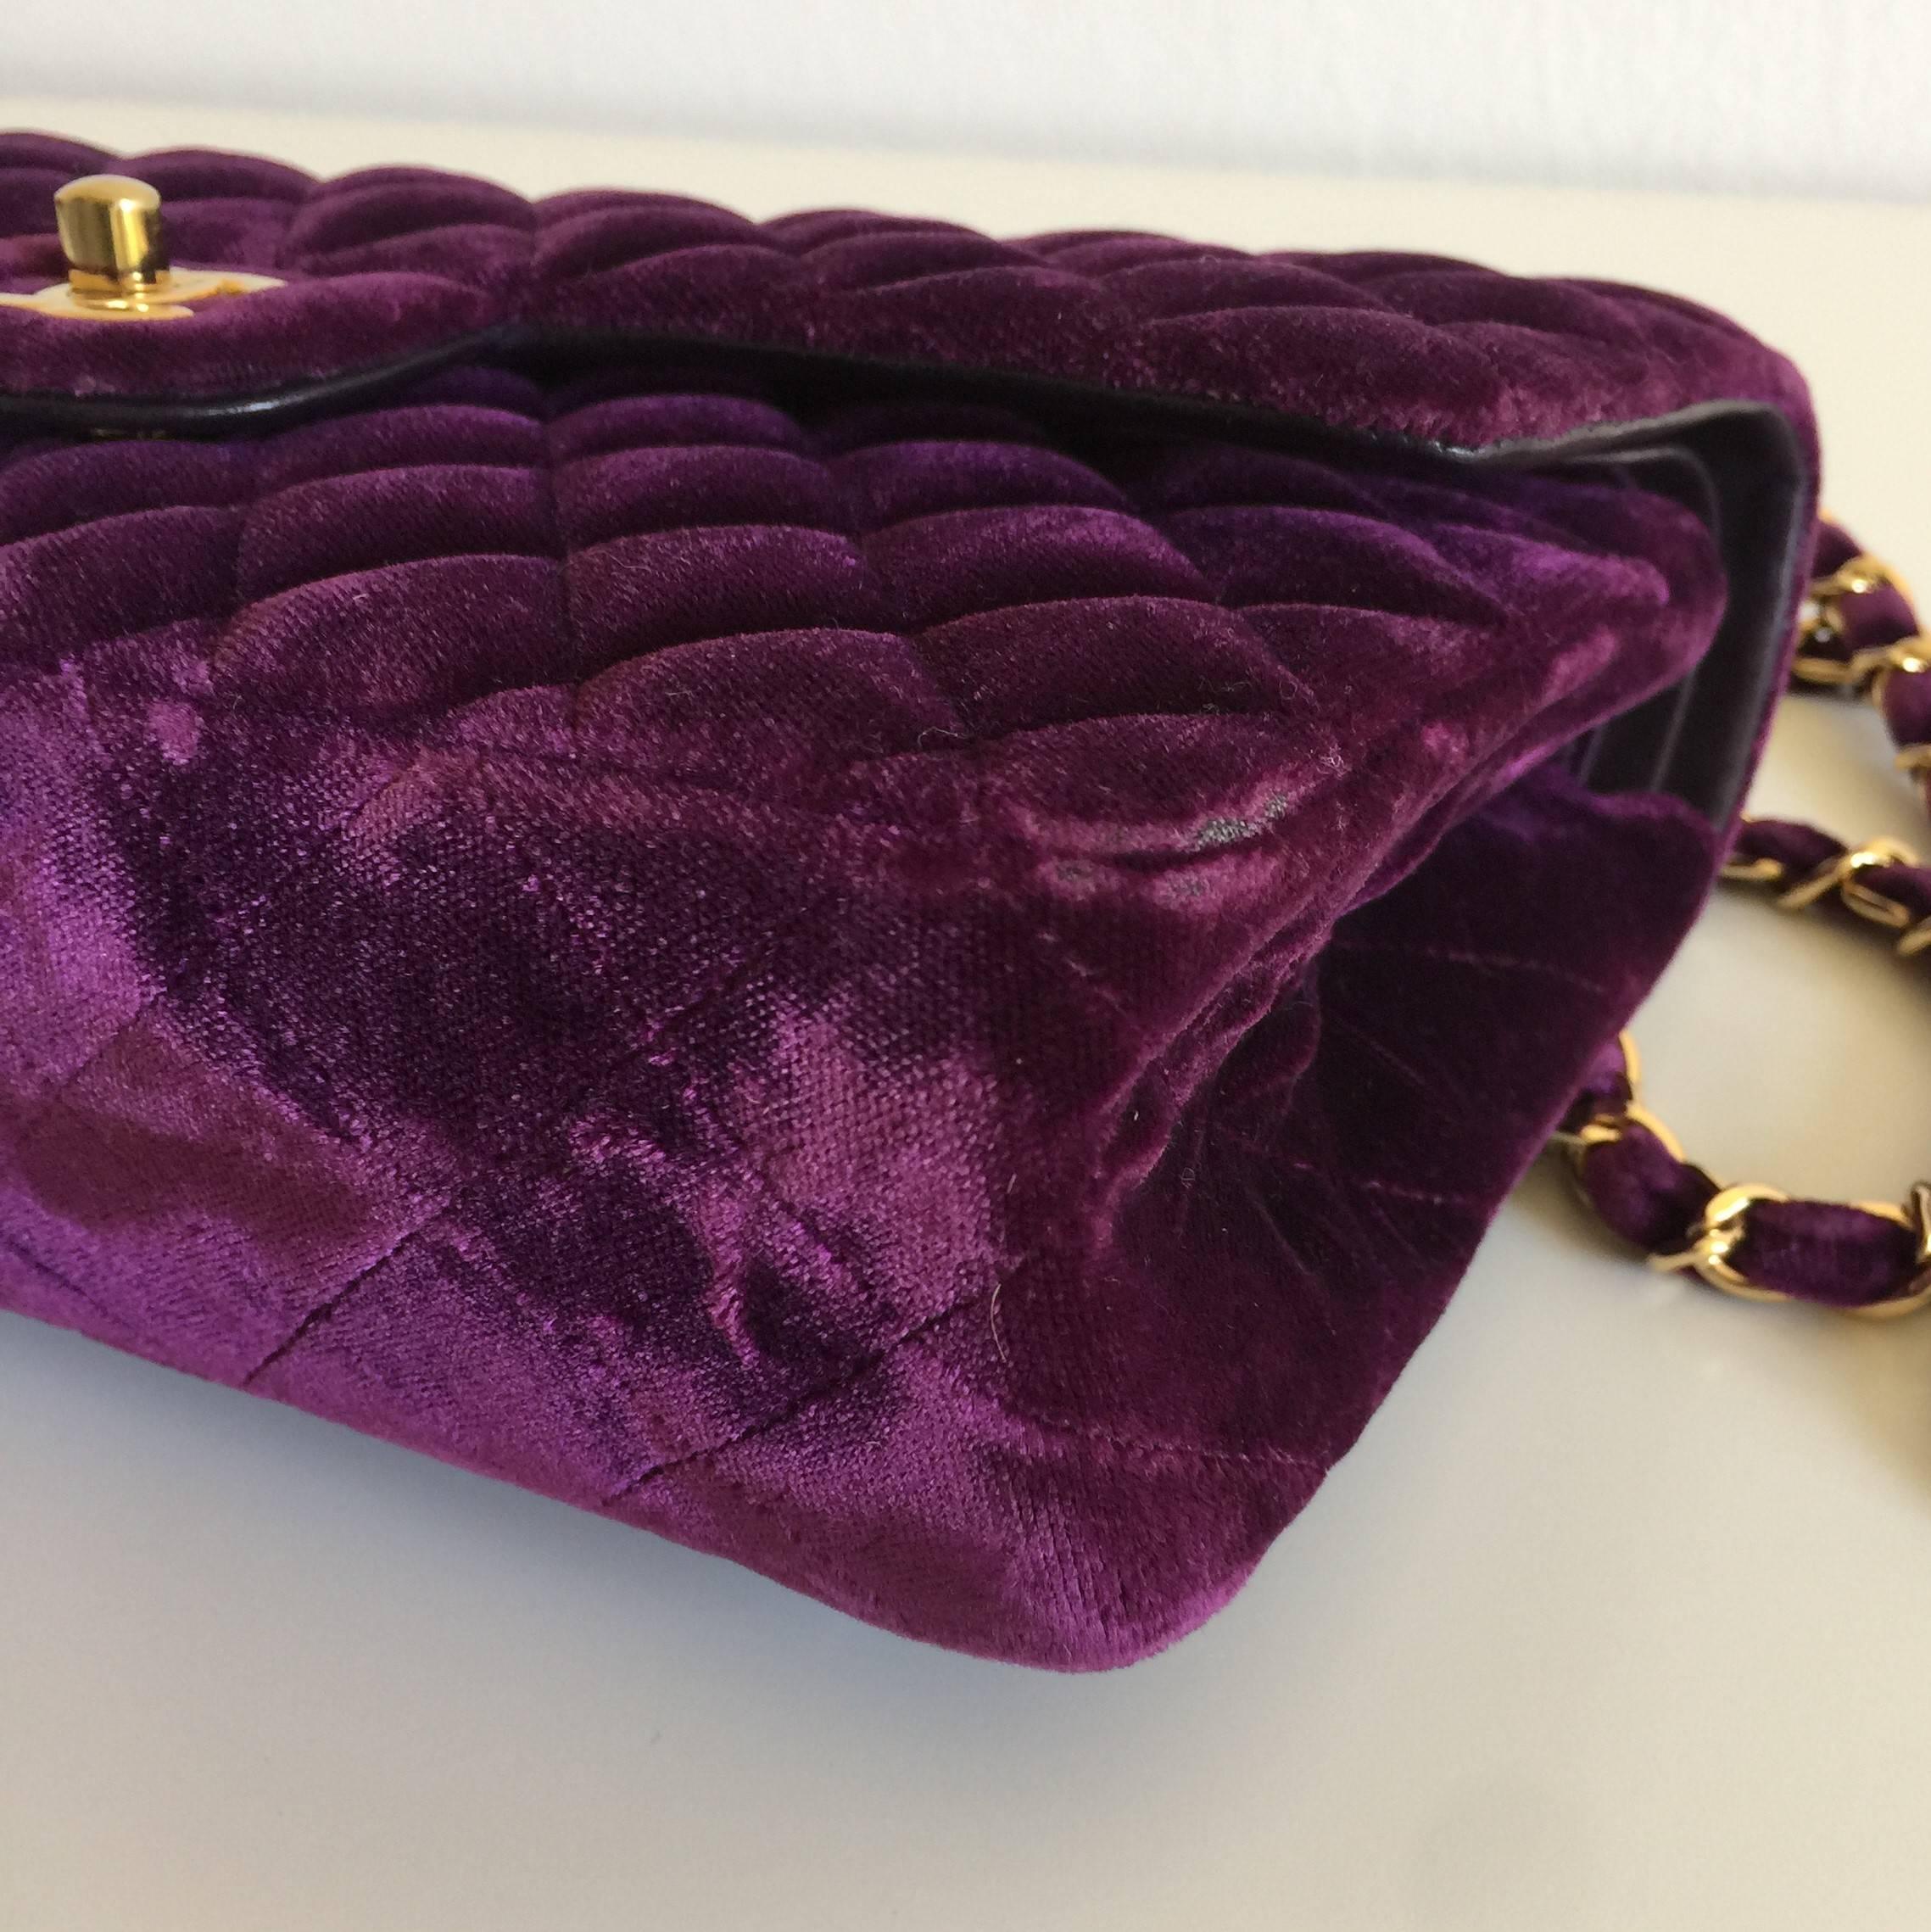 Chanel 2.55 Timeless Purple Velvet  Double Flap Hand/Shoulder Bag In Excellent Condition For Sale In Milan, IT